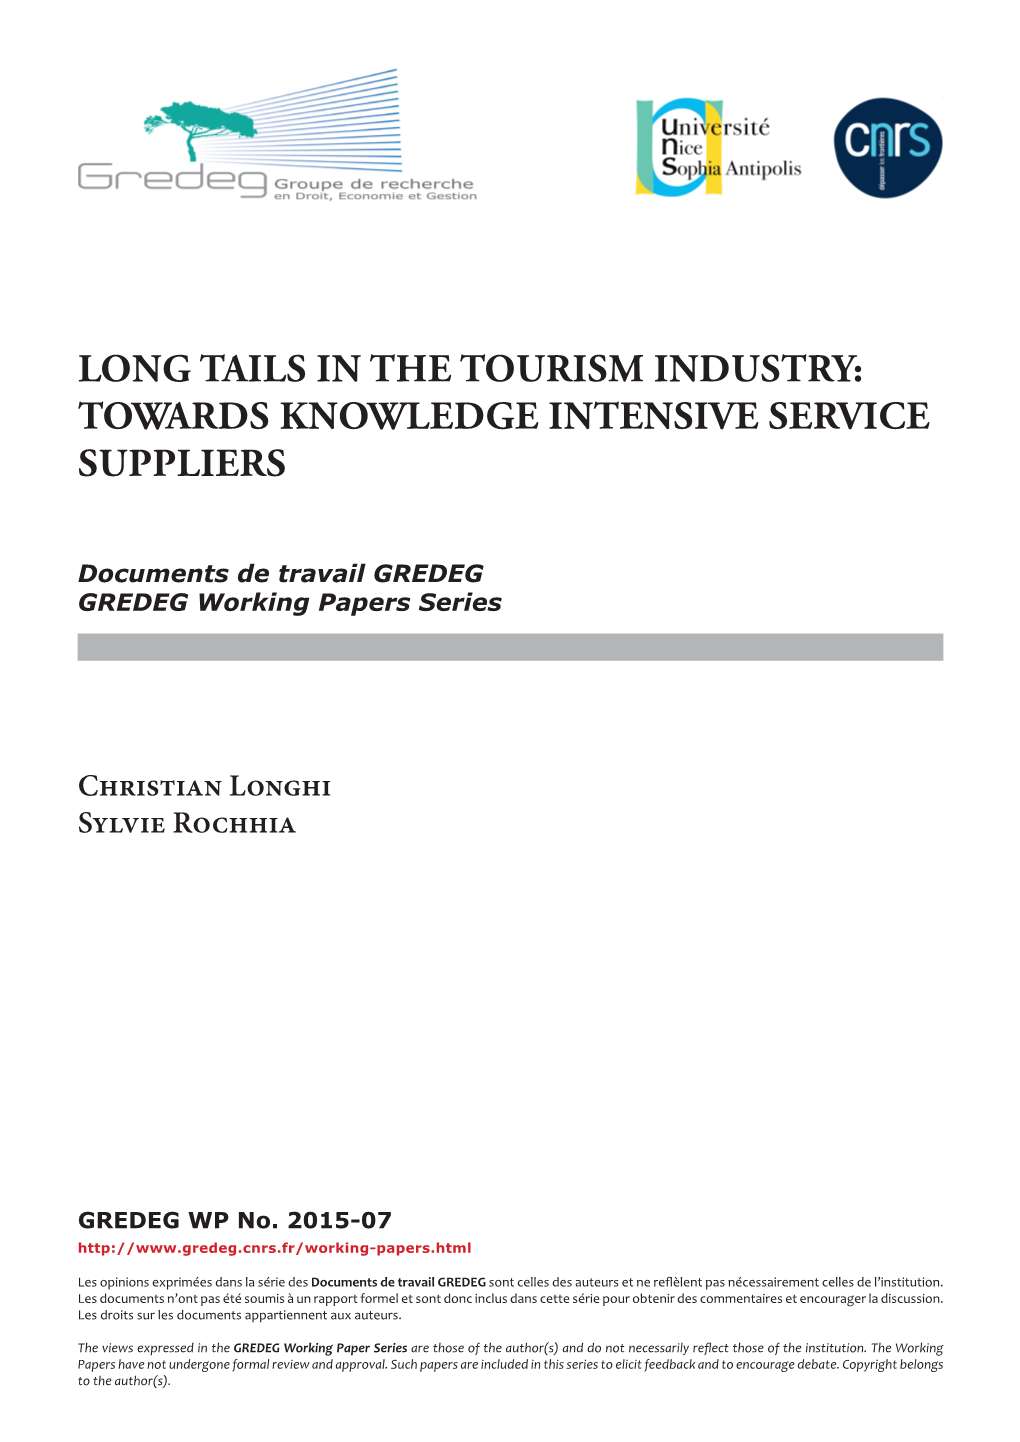 Long Tails in the Tourism Industry: Towards Knowledge Intensive Service Suppliers